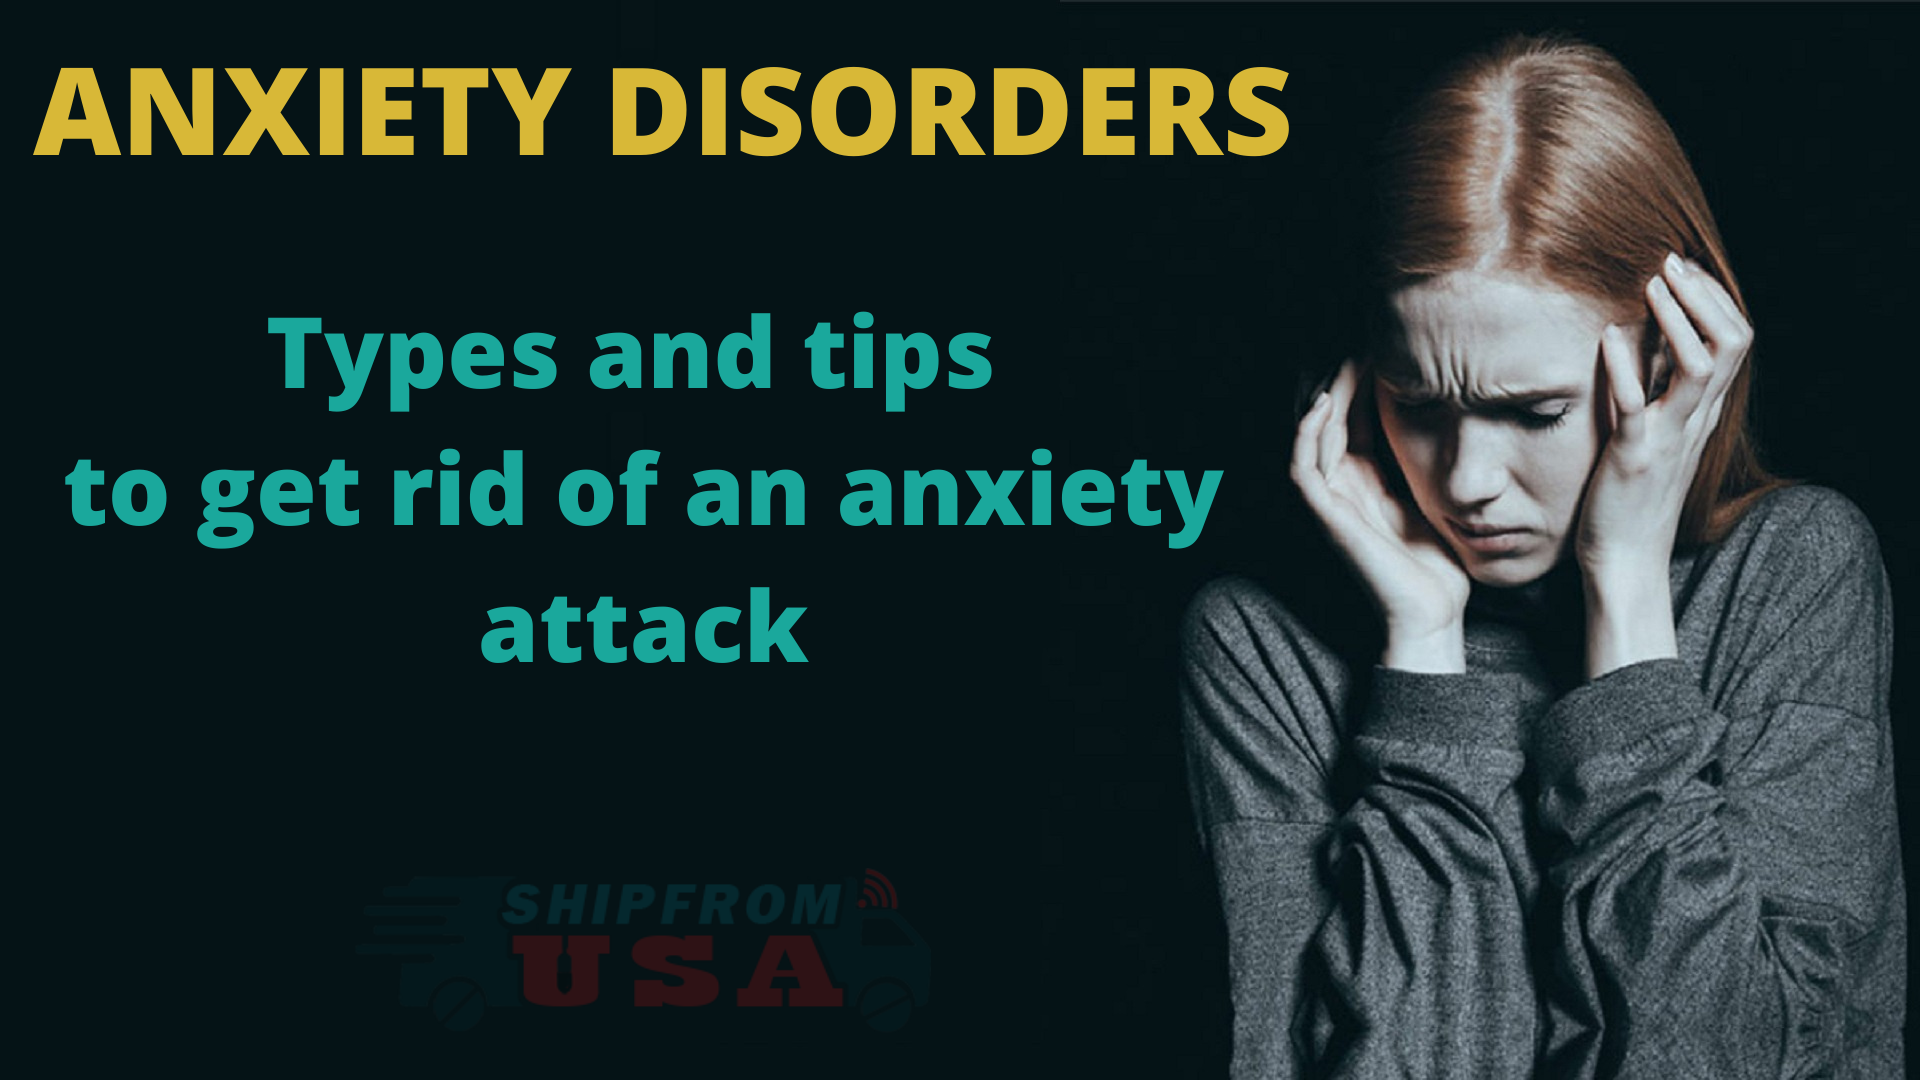 Anxiety disorders Types and tips to get rid of an anxiety attack